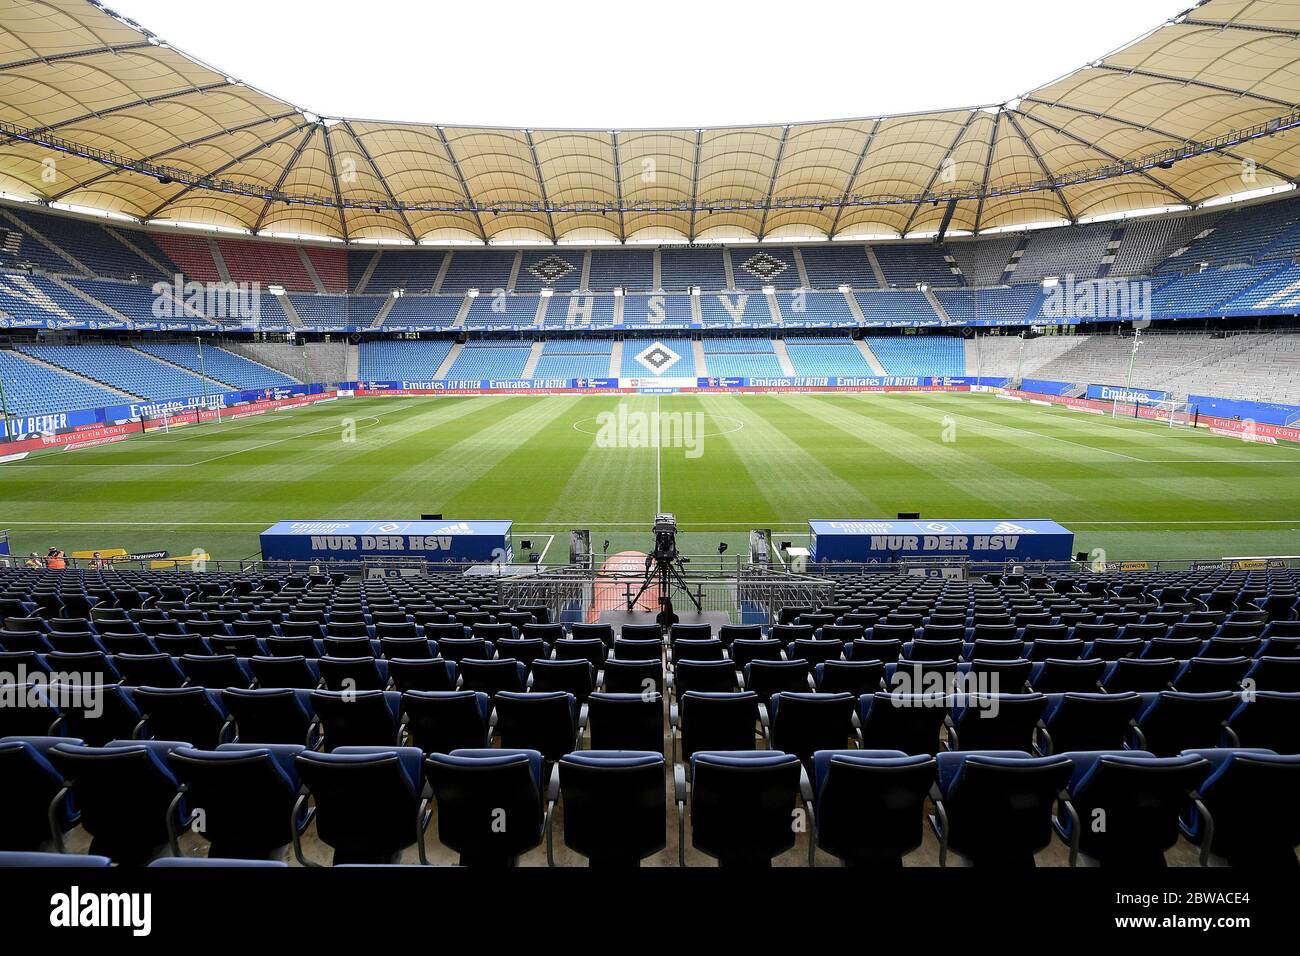 Karlsruhe, Germany. 31st May, 2020. Football 2nd Bundesliga, 29th matchday, Hamburger SV - SV Wehen Wiesbaden in the Volksparkstadion. View into the empty stadium before the game starts. Credit: Stuart Franklin/Getty Images Europe/Pool/dpa - IMPORTANT NOTE: In accordance with the regulations of the DFL Deutsche Fußball Liga and the DFB Deutscher Fußball-Bund, it is prohibited to exploit or have exploited in the stadium and/or from the game taken photographs in the form of sequence images and/or video-like photo series./dpa/Alamy Live News Stock Photo